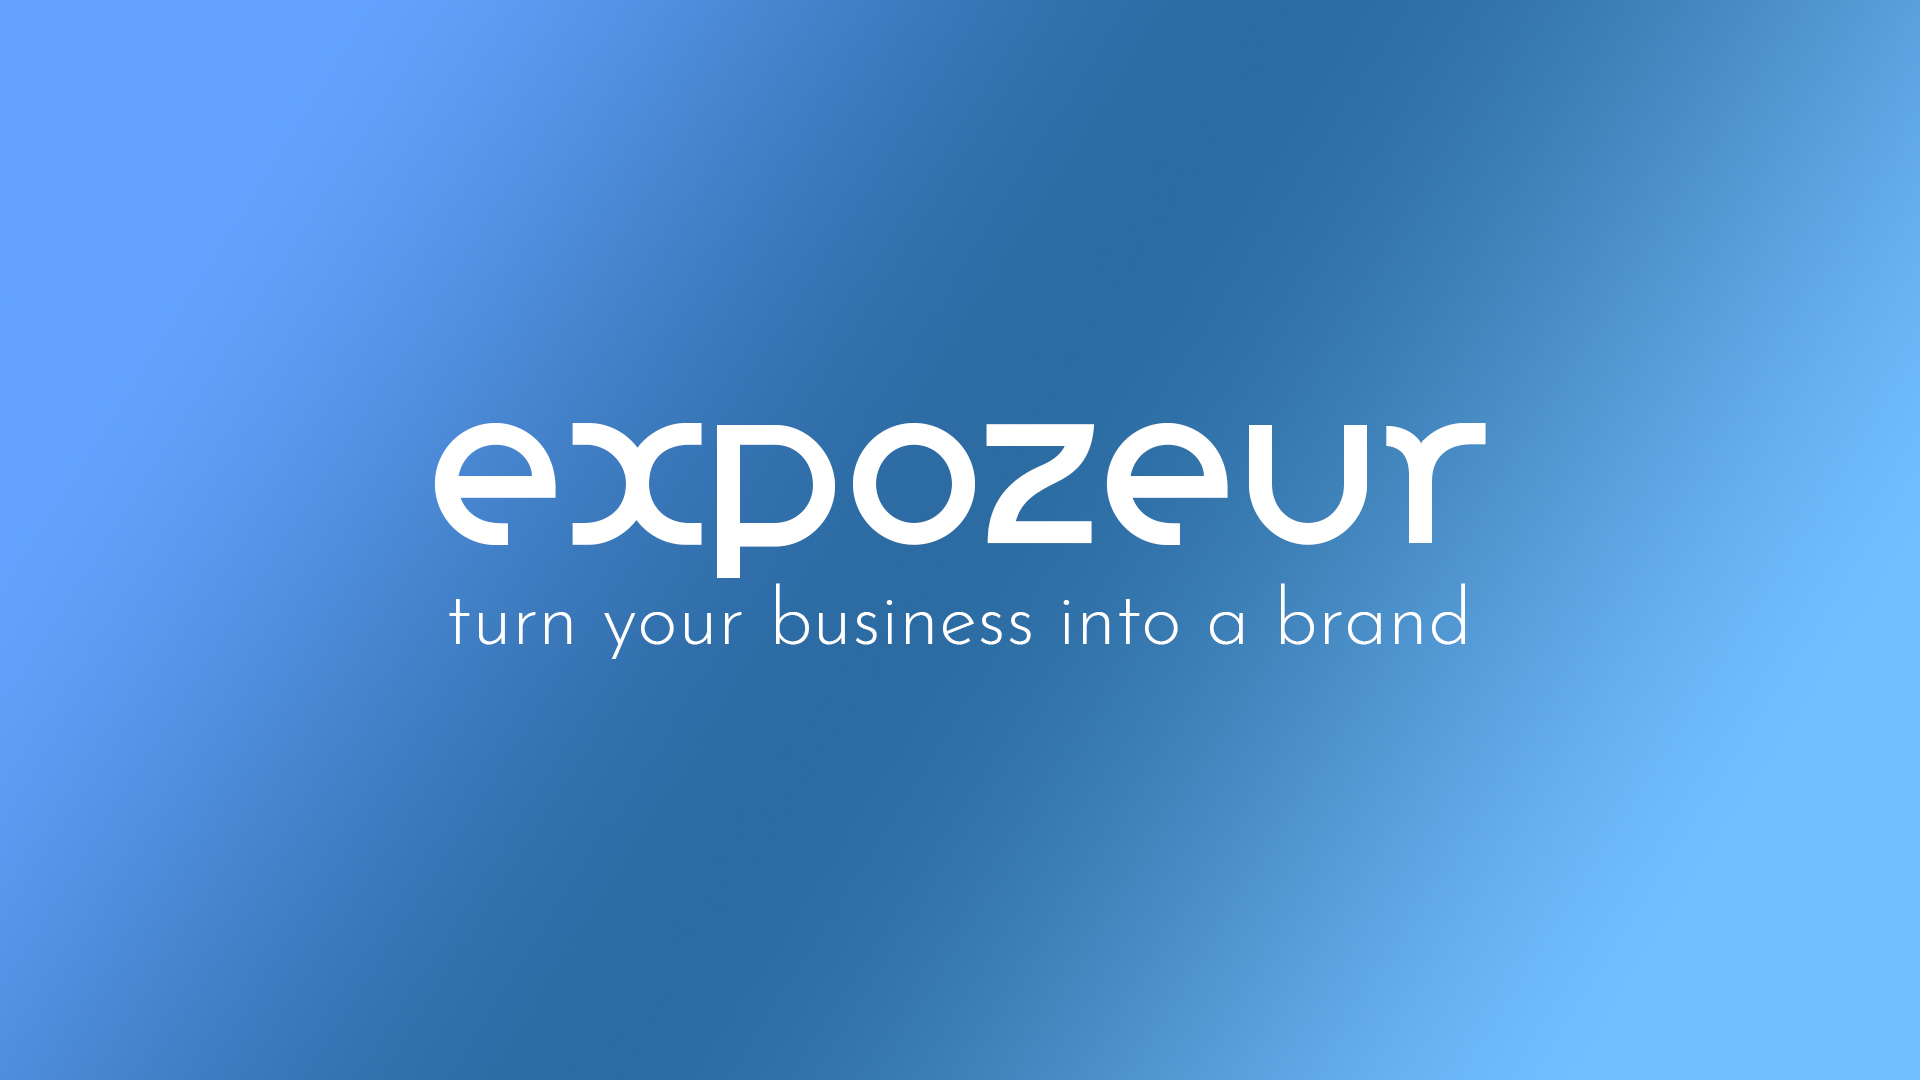 Expozeur Redefines Small Business Growth Potential with 'Business-to-Brand' Consulting